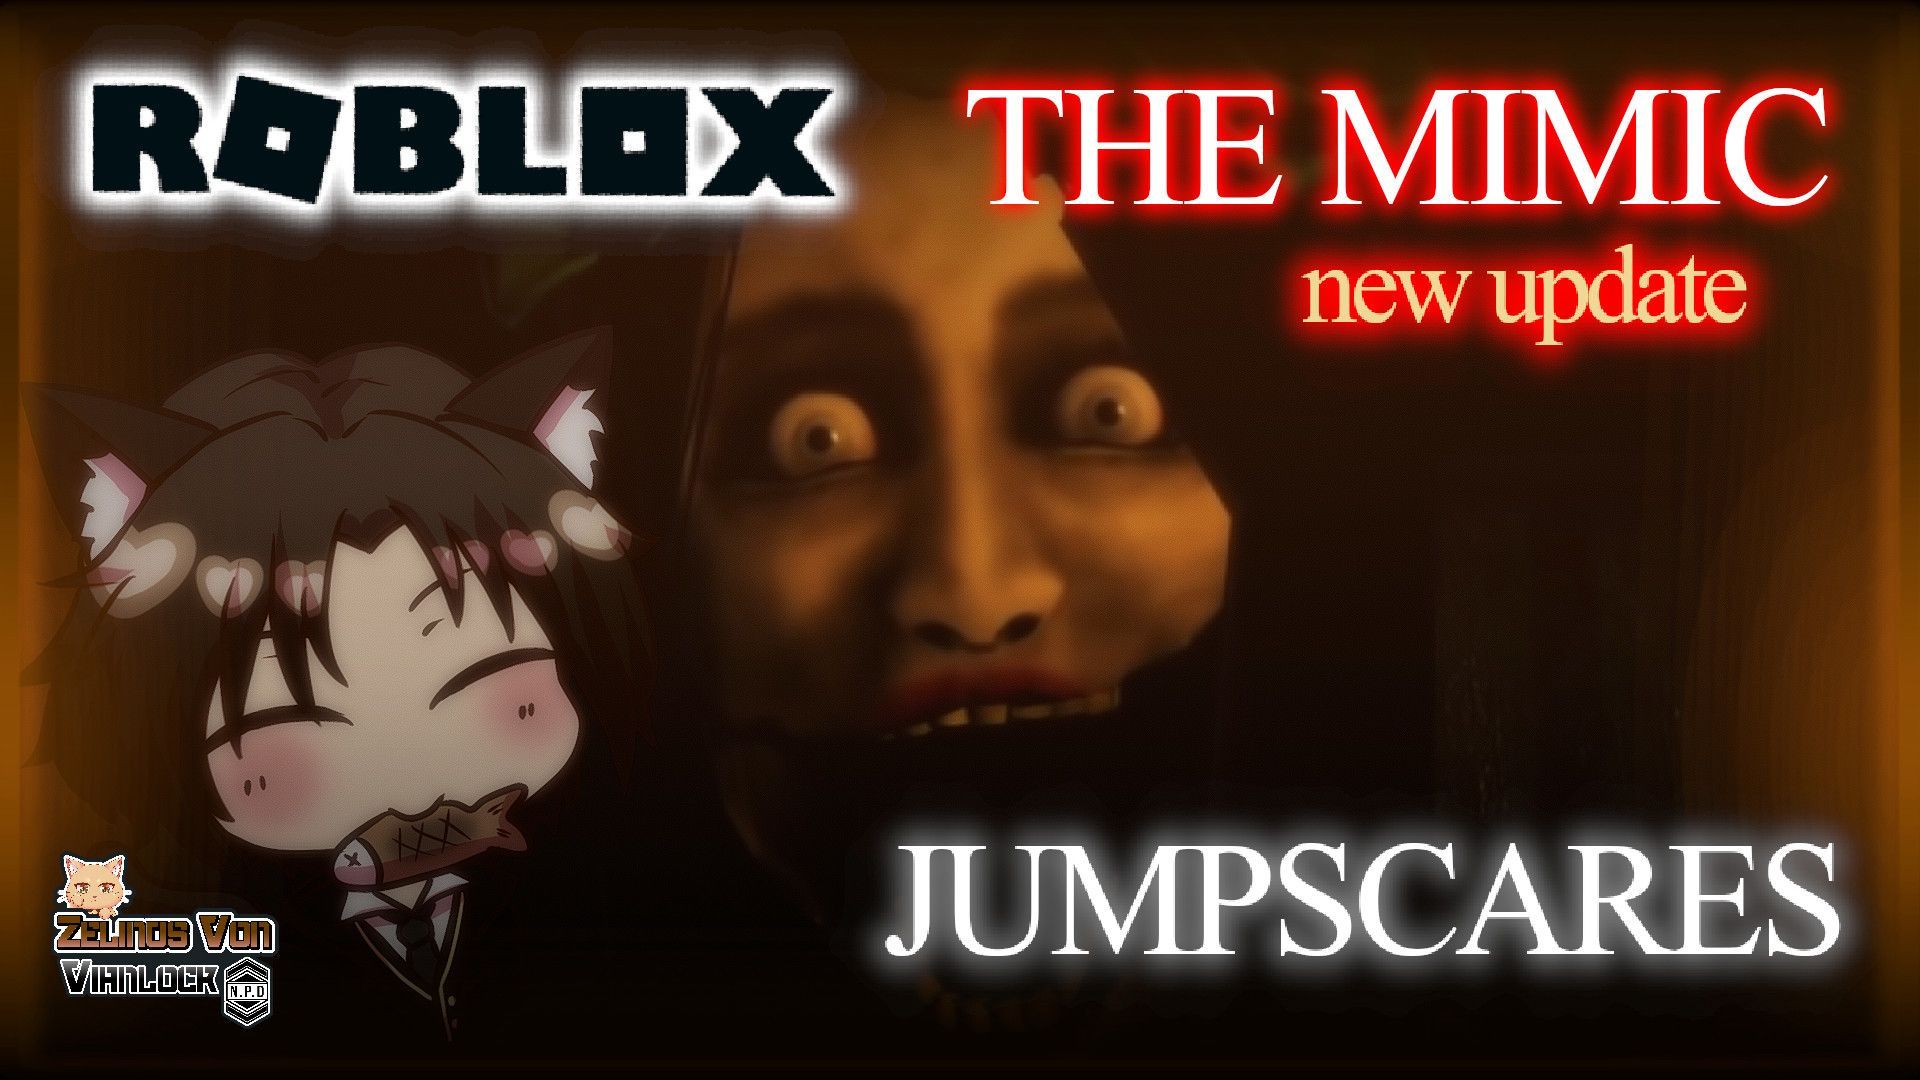 What Is The Mimic In Roblox? How To Play Chapter 4